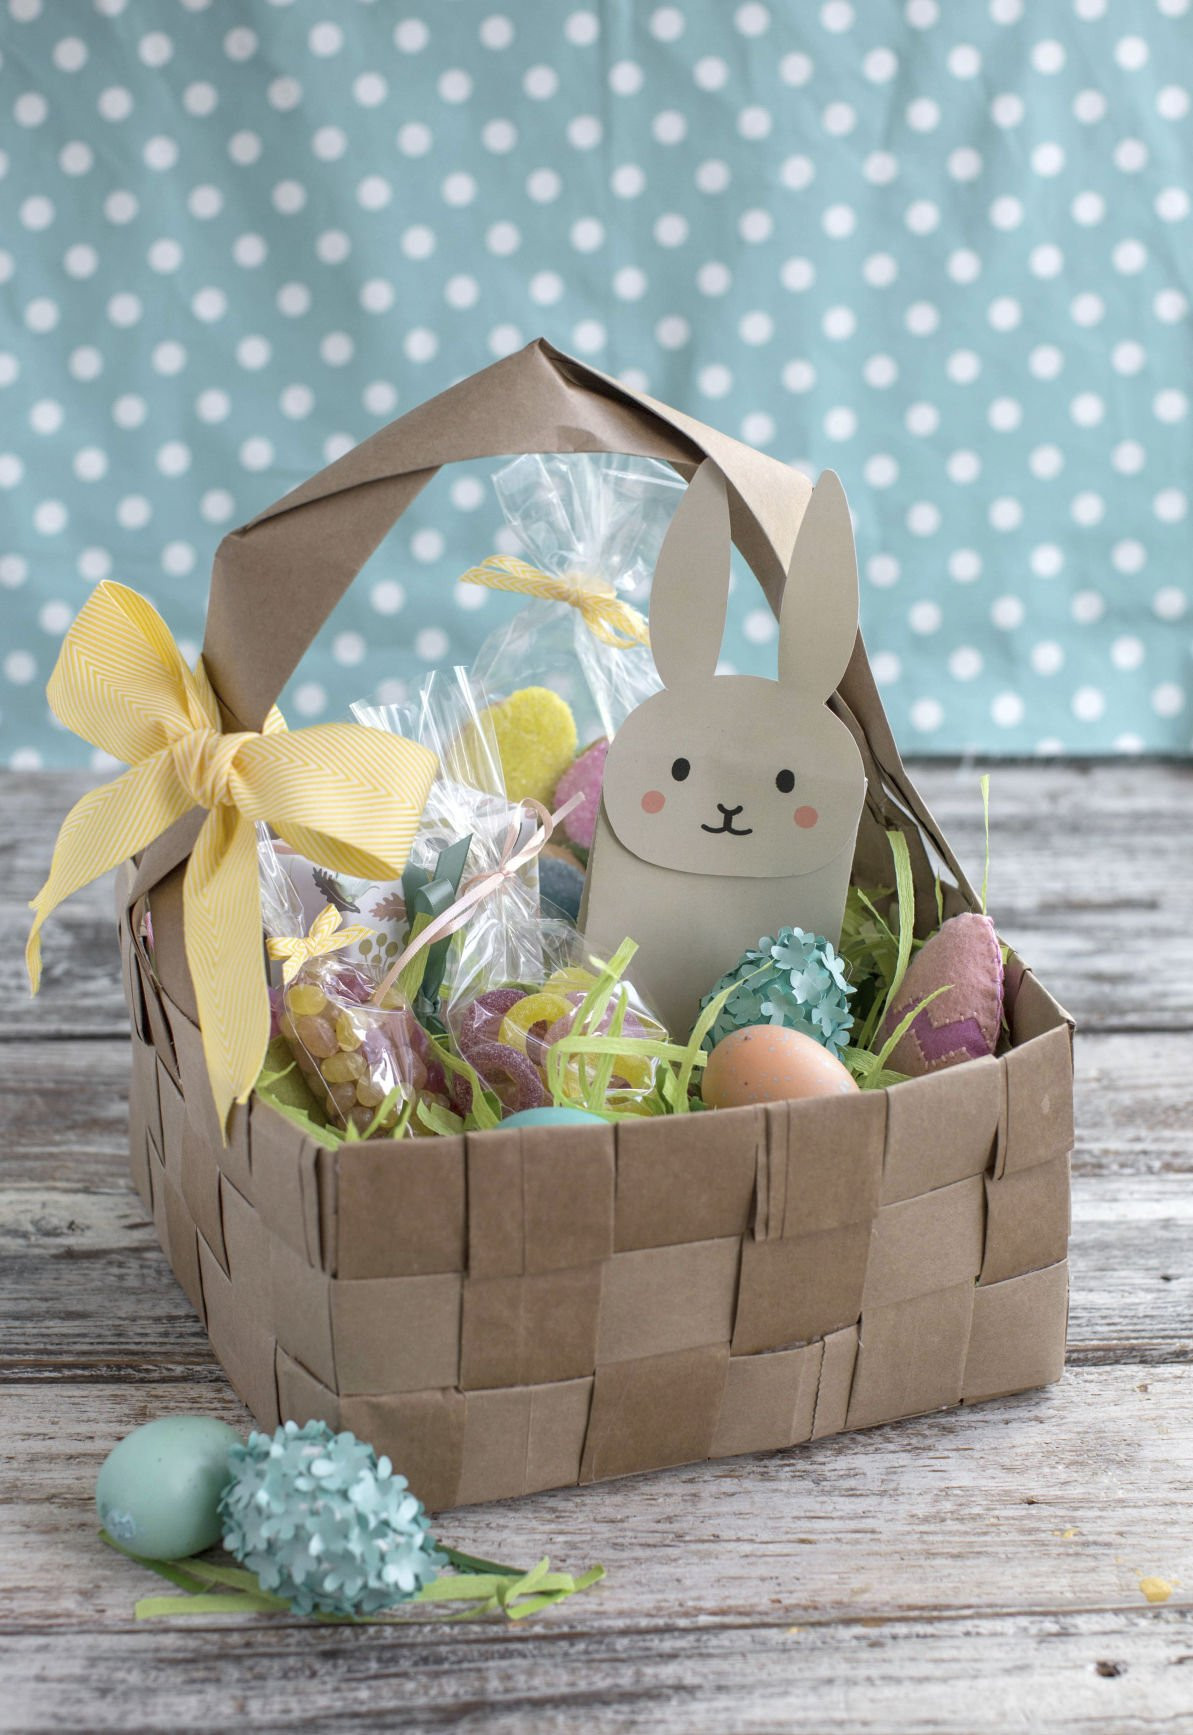 Diy Easter Basket Luxury Hop to It 5 Ways to Creative with Easter Baskets